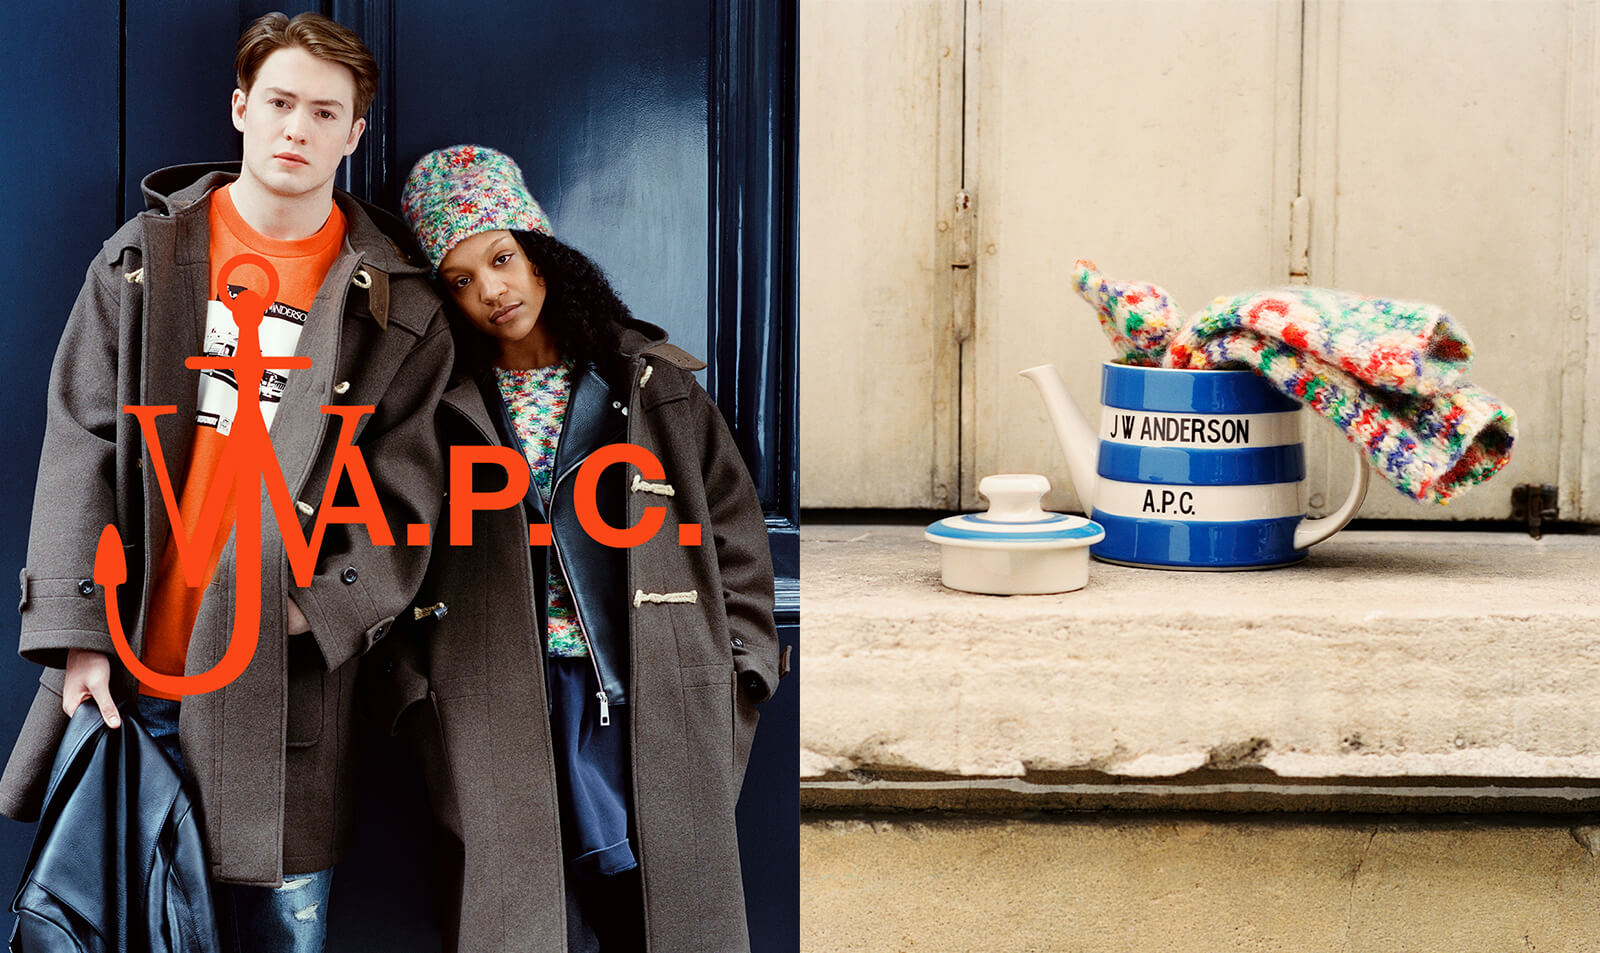 A.P.C. × JW ANDERSON